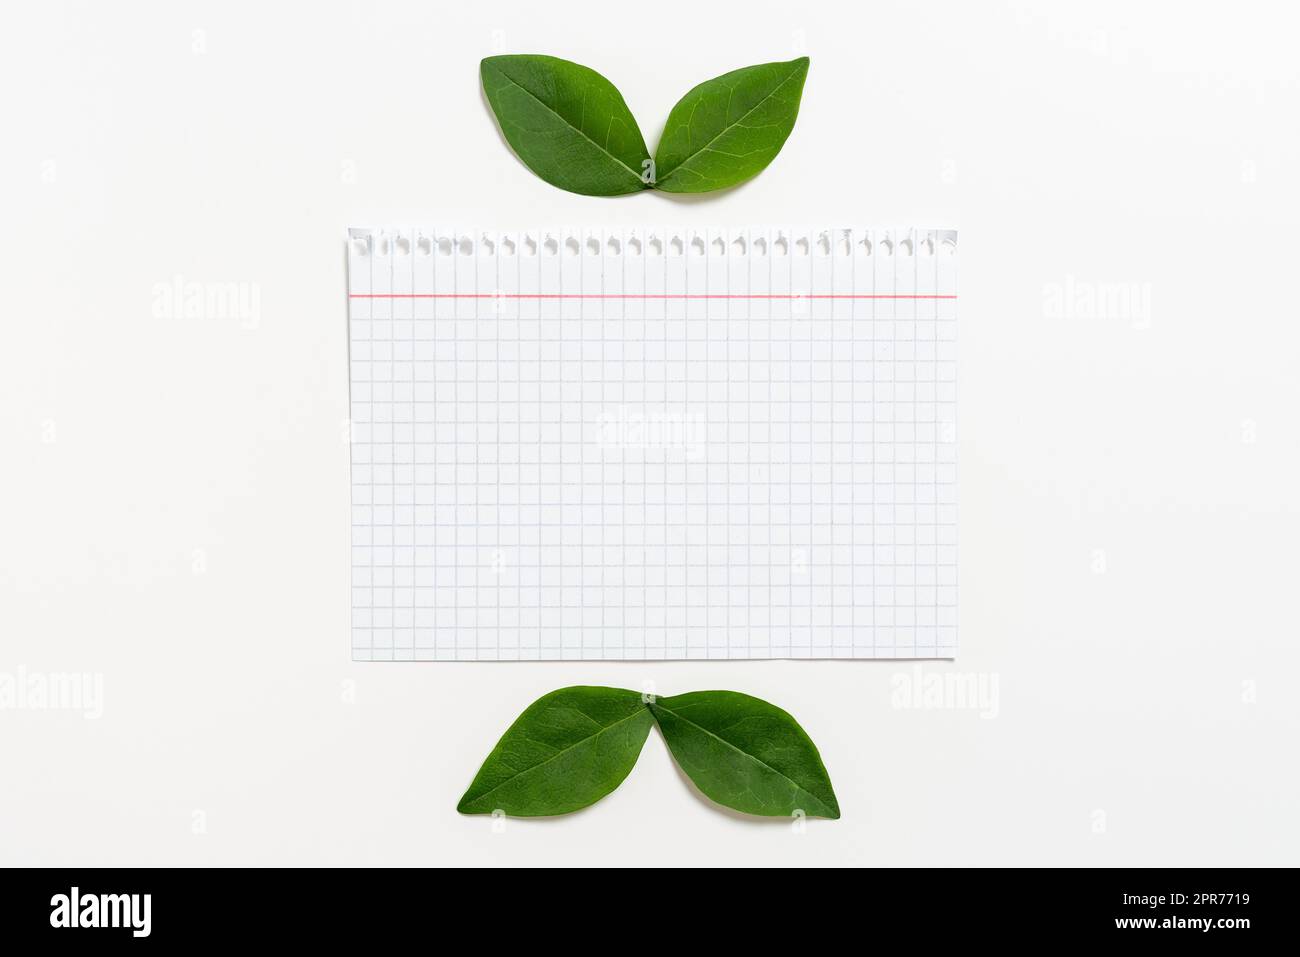 Notebook Sheet With Checked Patterned Line And Leaves For Creative Banner. Blank Paper With Fresh Botany For Layout For Business Advertisement And Brand Promotion. Stock Photo